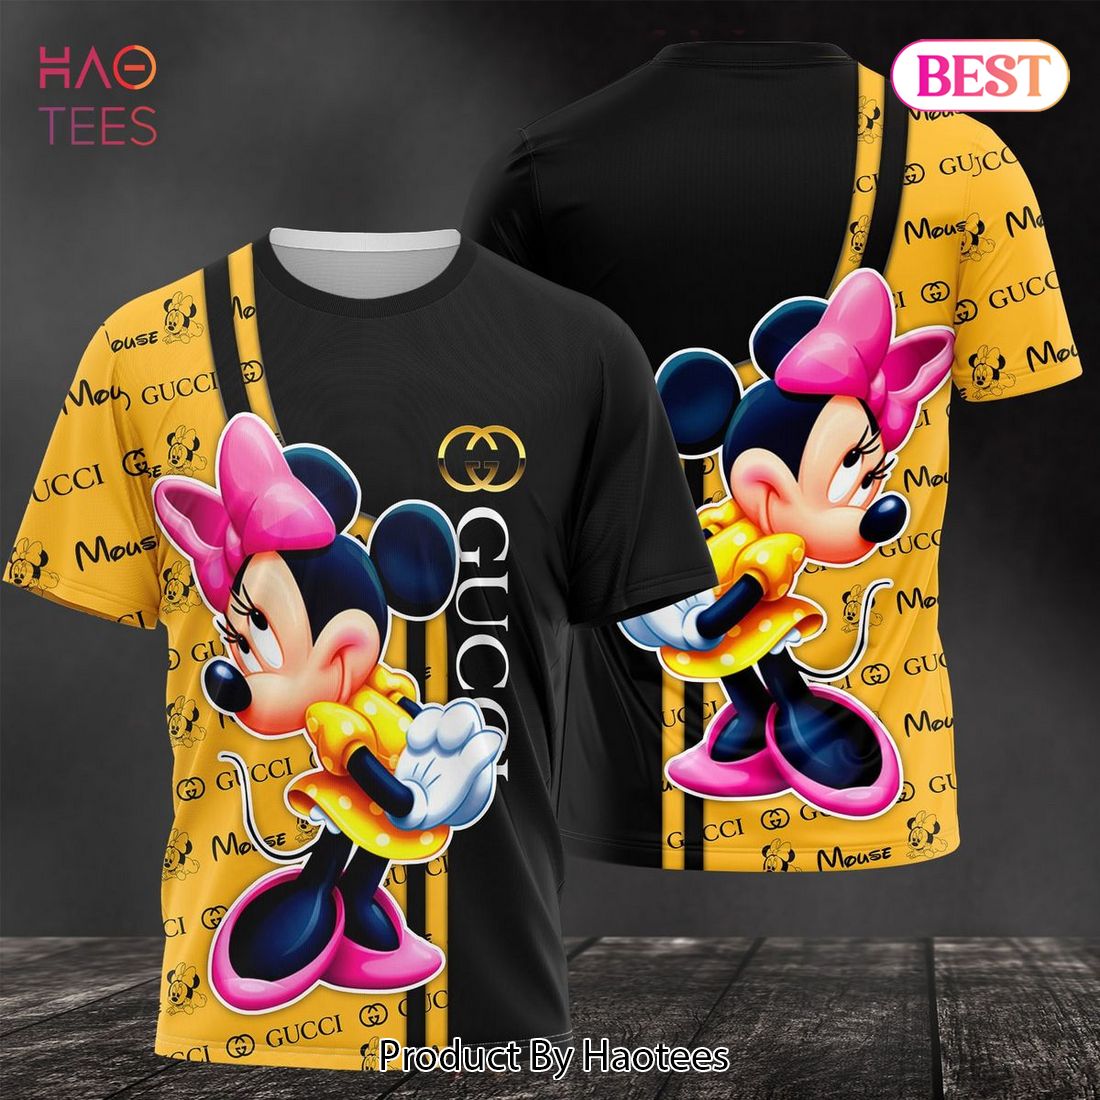 AVAILABLES Gucci Pink Mickey Mouse Luxury Brand Gold Mix Black 3D T-Shirt Limited Edition